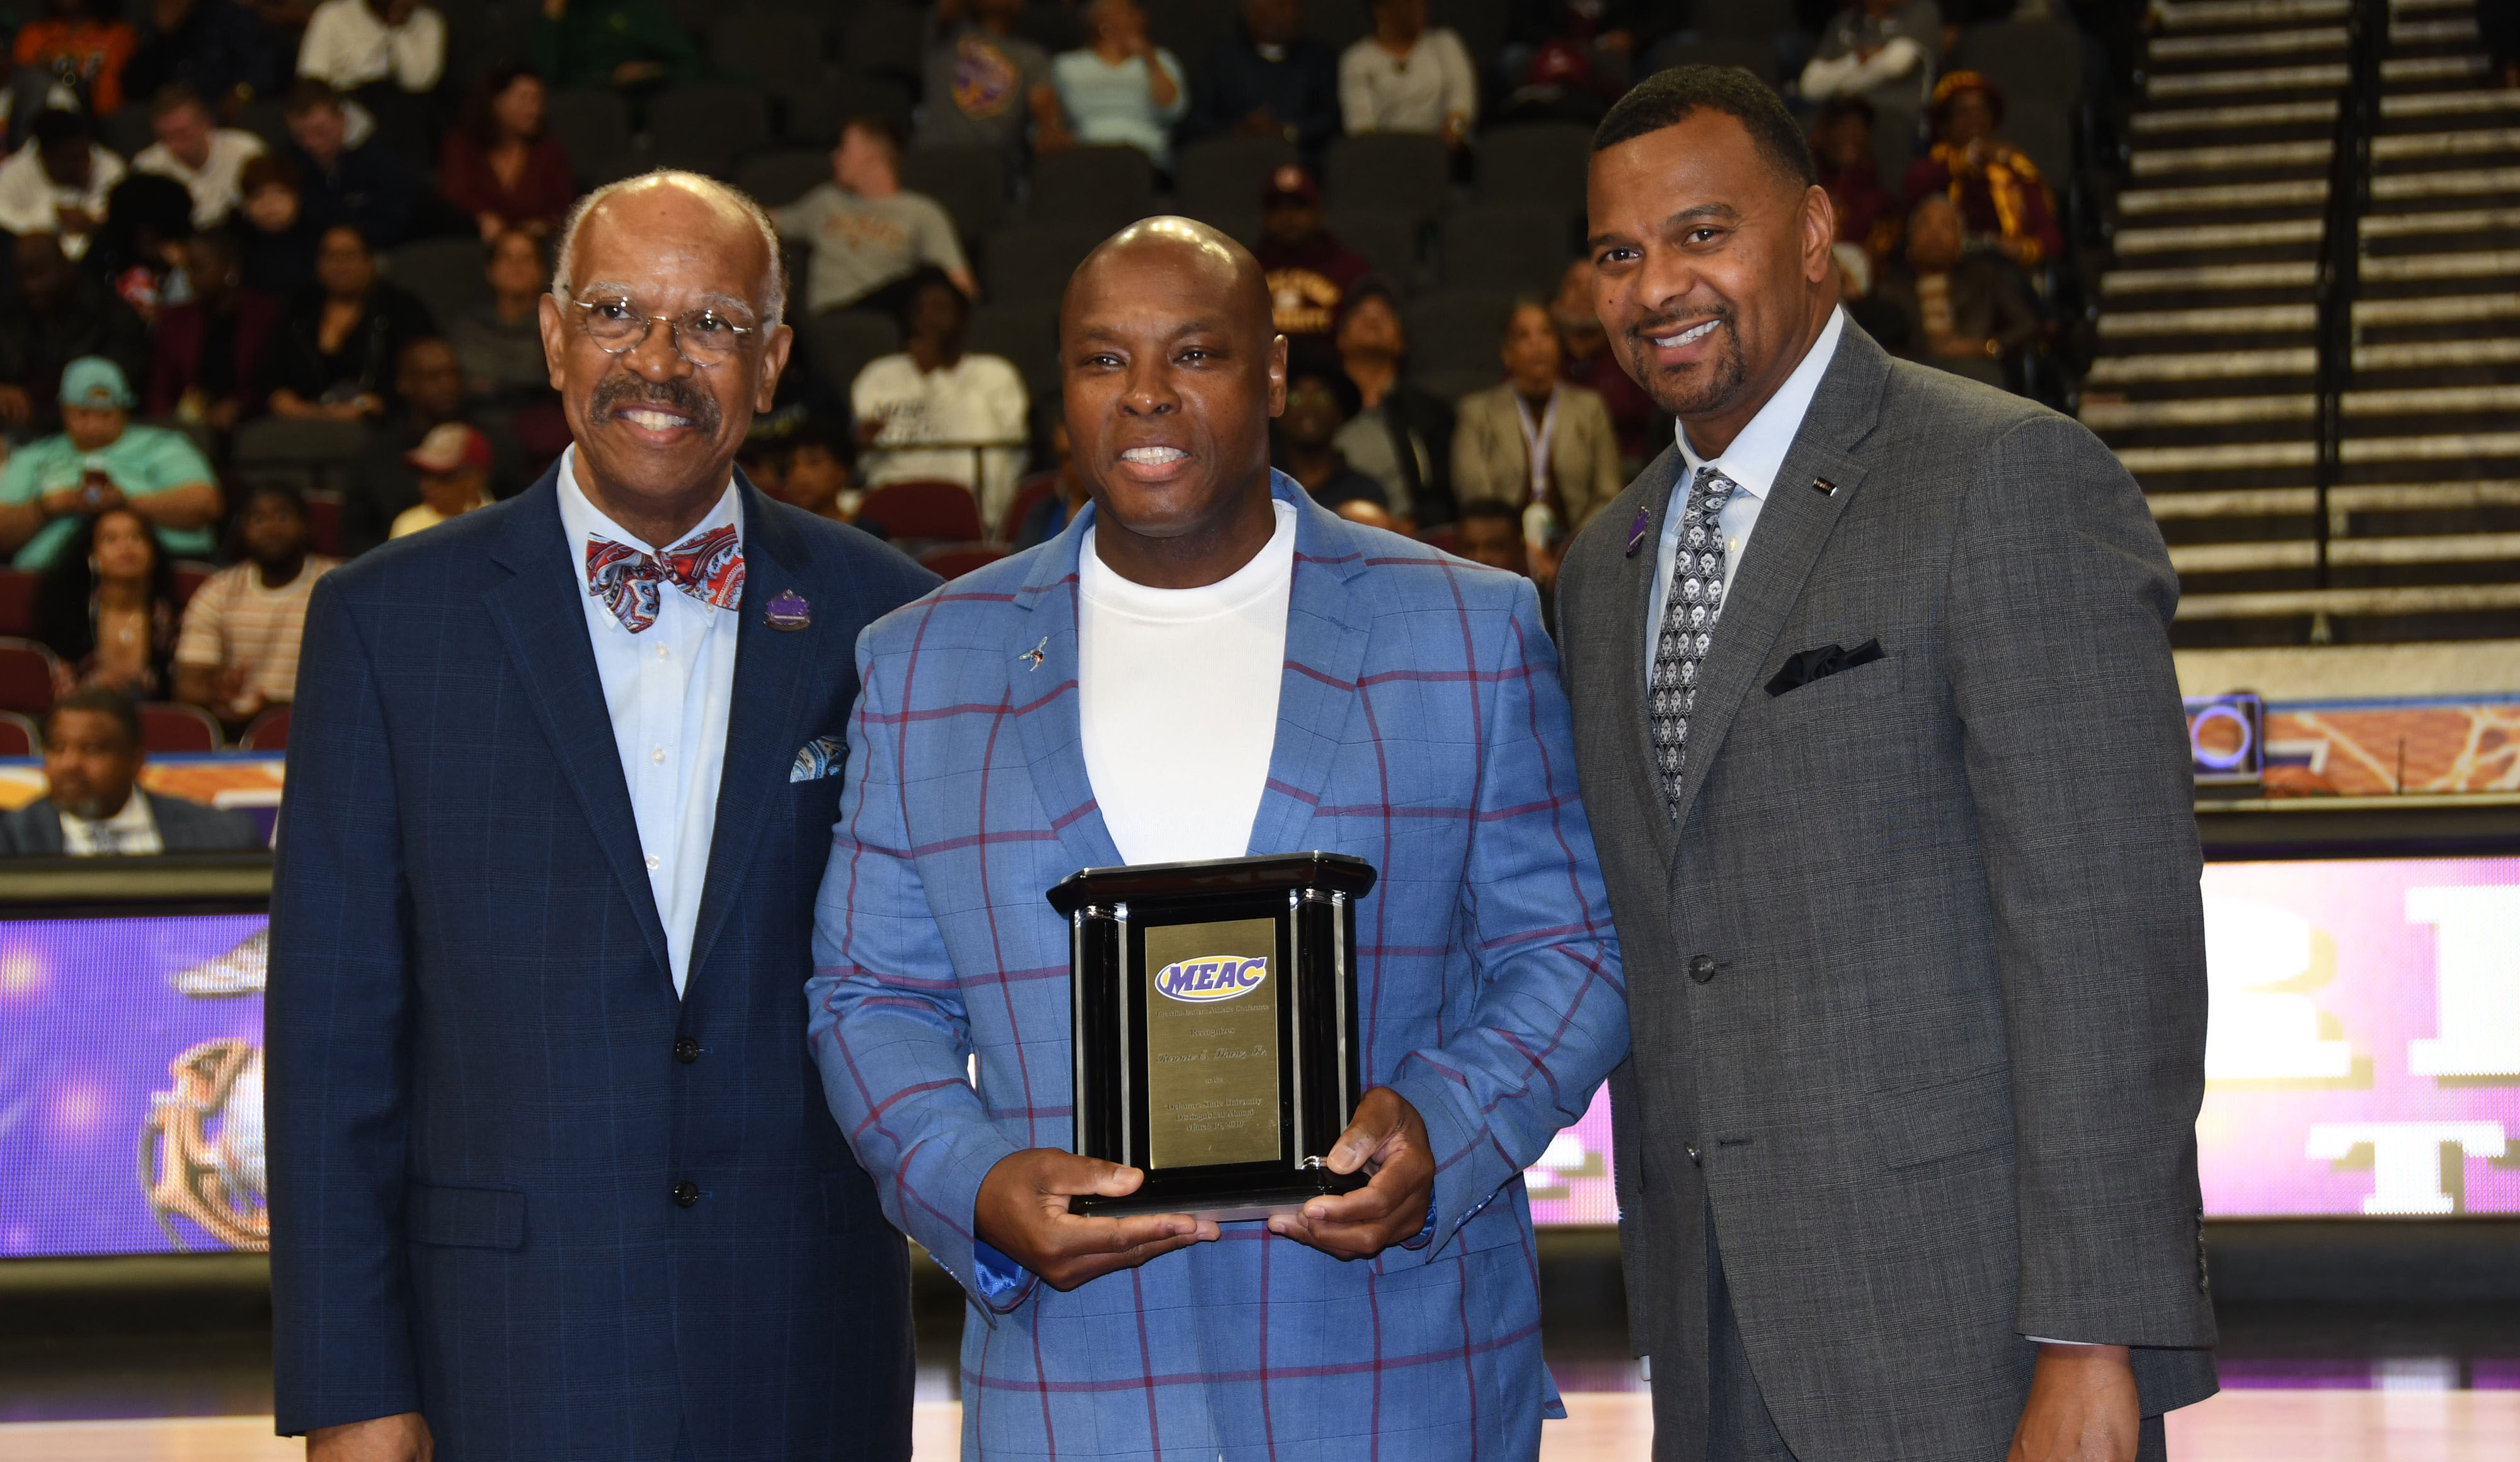 Delaware State University's 2019 Distinguished Alumnus of the Year Ronnie Shaw Sr. (center), receives the award from Dr. Irving H. Smith (l), president of the MEAC Delegate Assembly, and James Church of Priority Automotive, tournament sponsor.